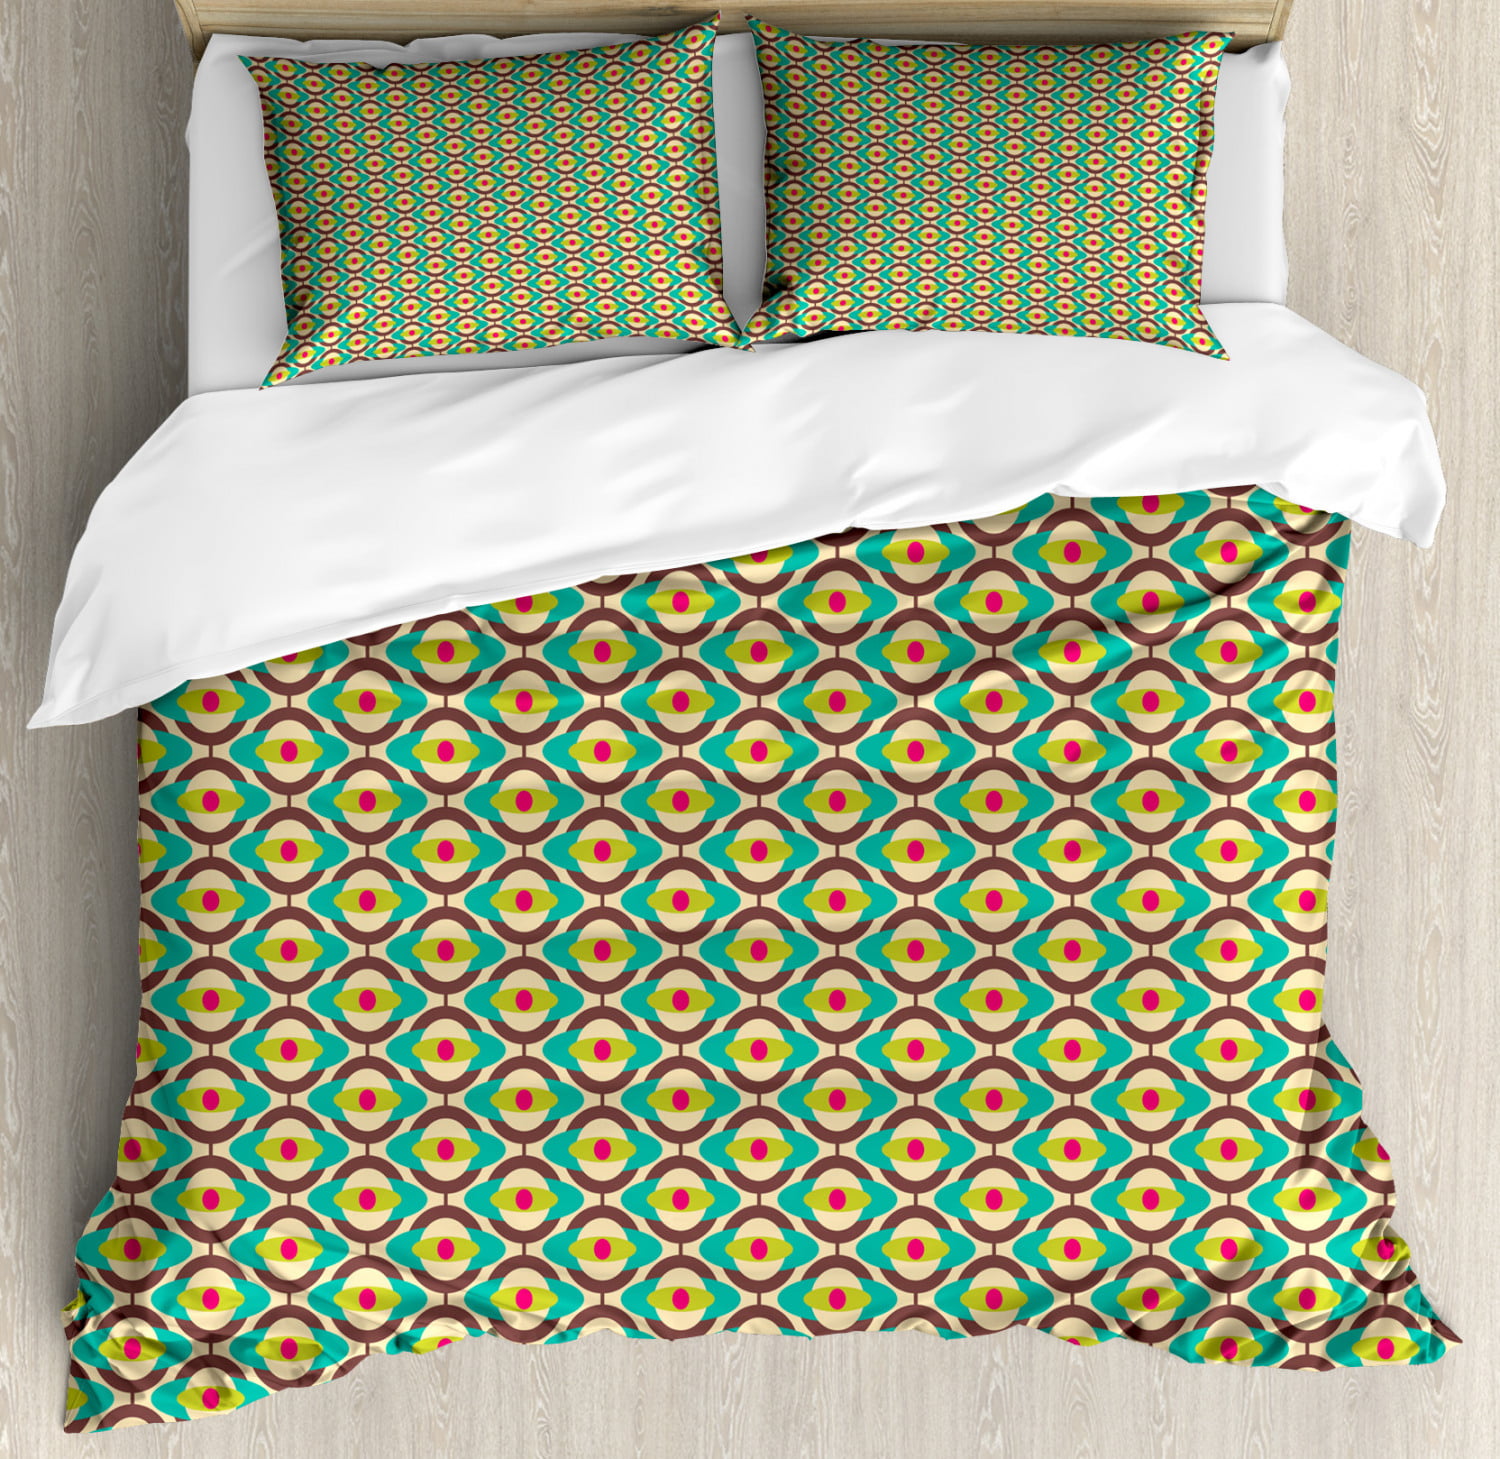 Retro King Size Duvet Cover Set Funky Groovy Pattern With